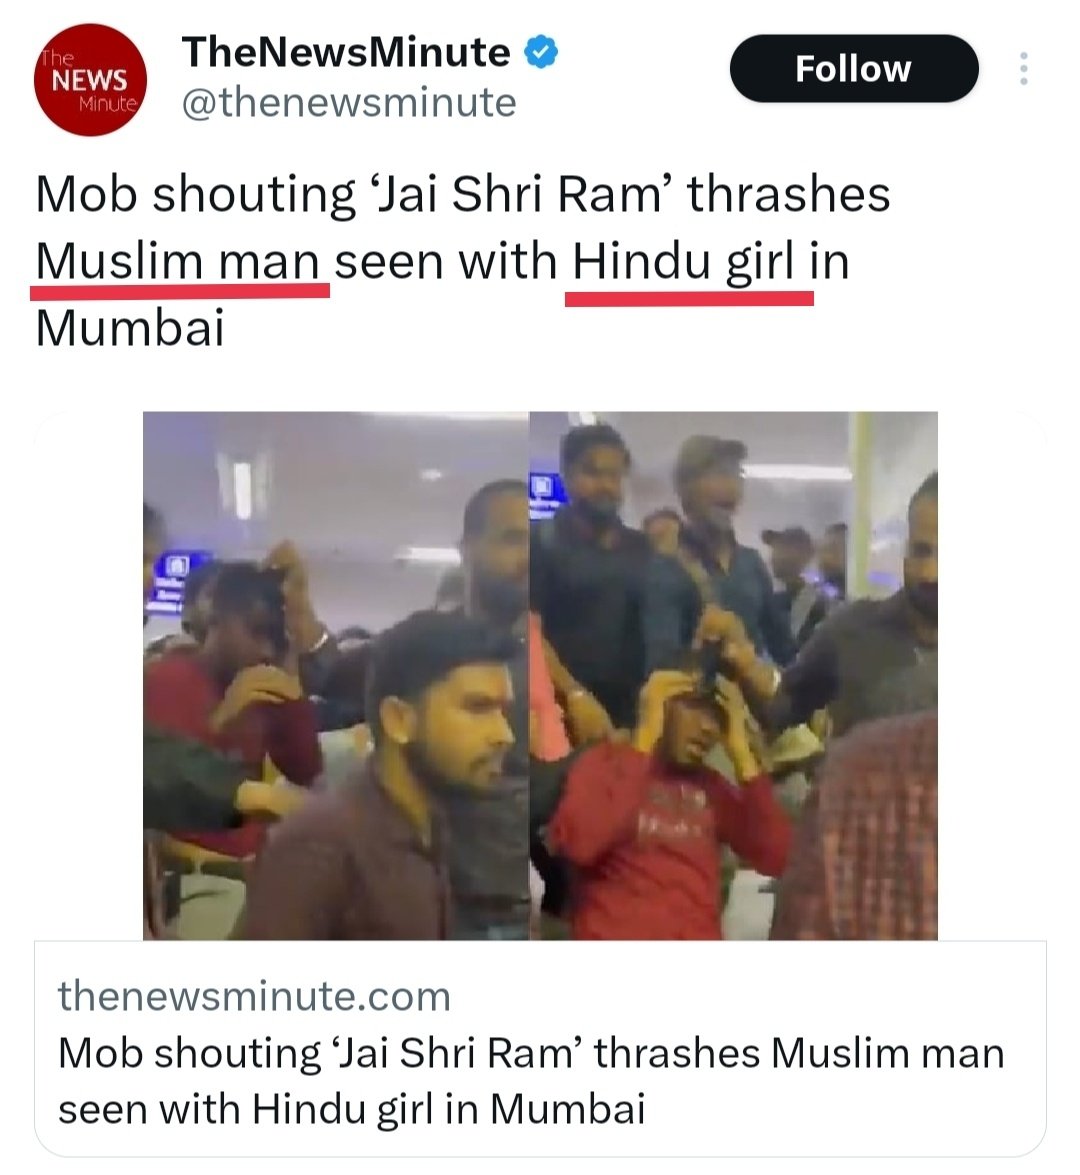 The propaganda news website @thenewsminute deliberately omitted the name of the accused because mentioning 'Fayaz' would have endangered secularism.